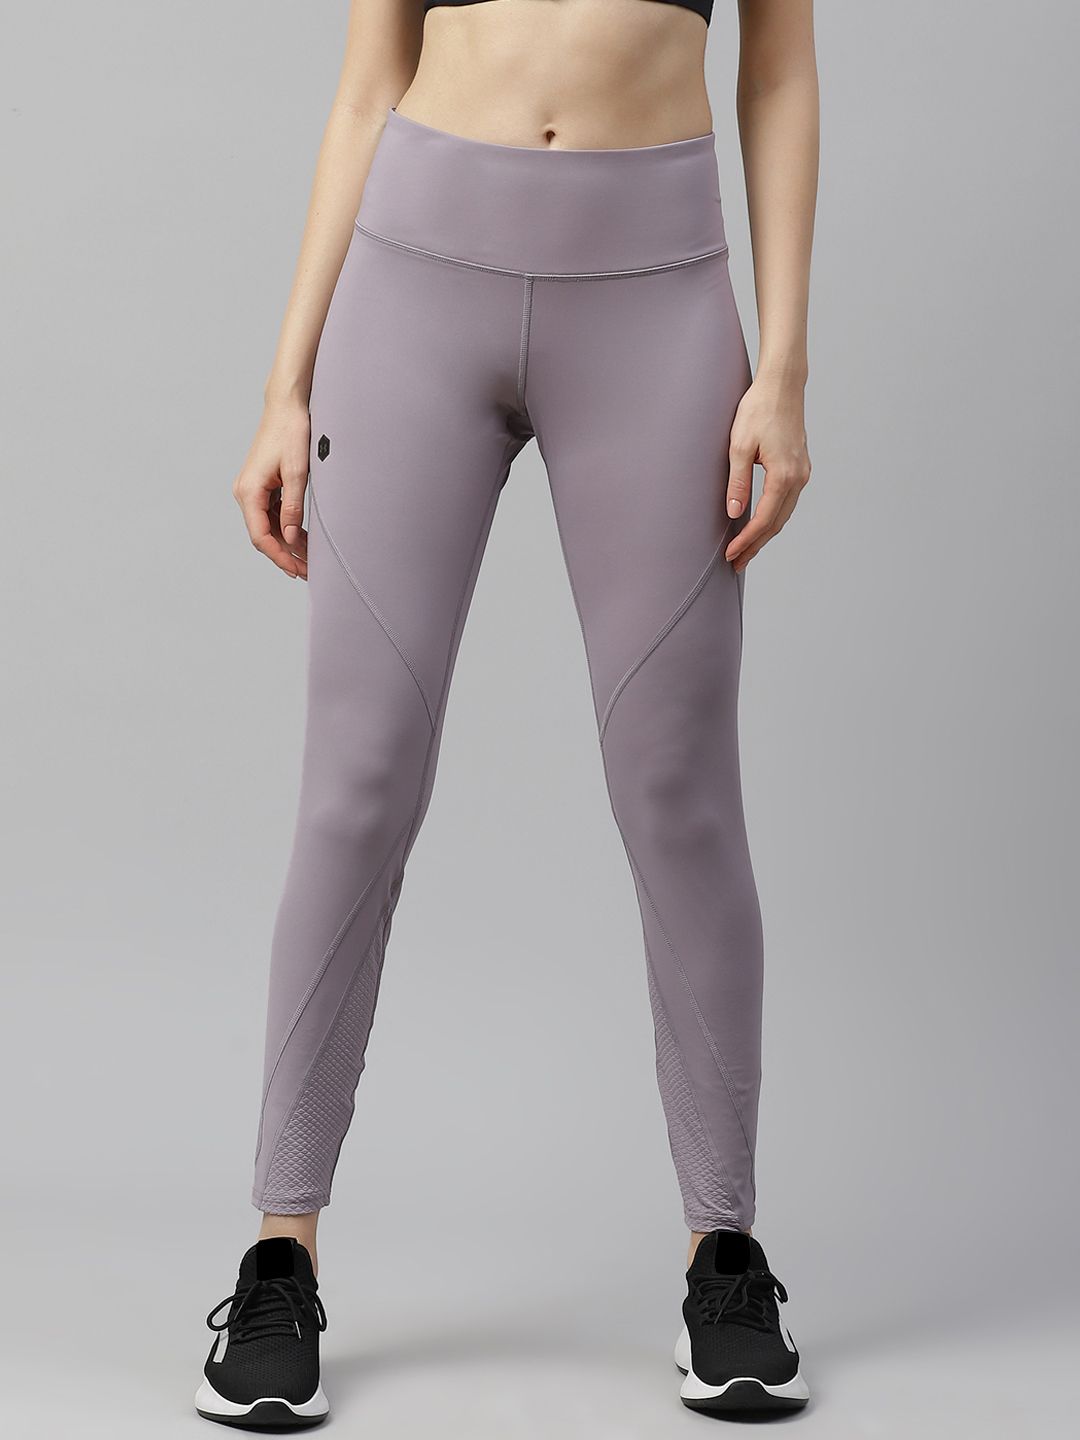 UNDER ARMOUR Women Lavender Solid Rush Tights Price in India